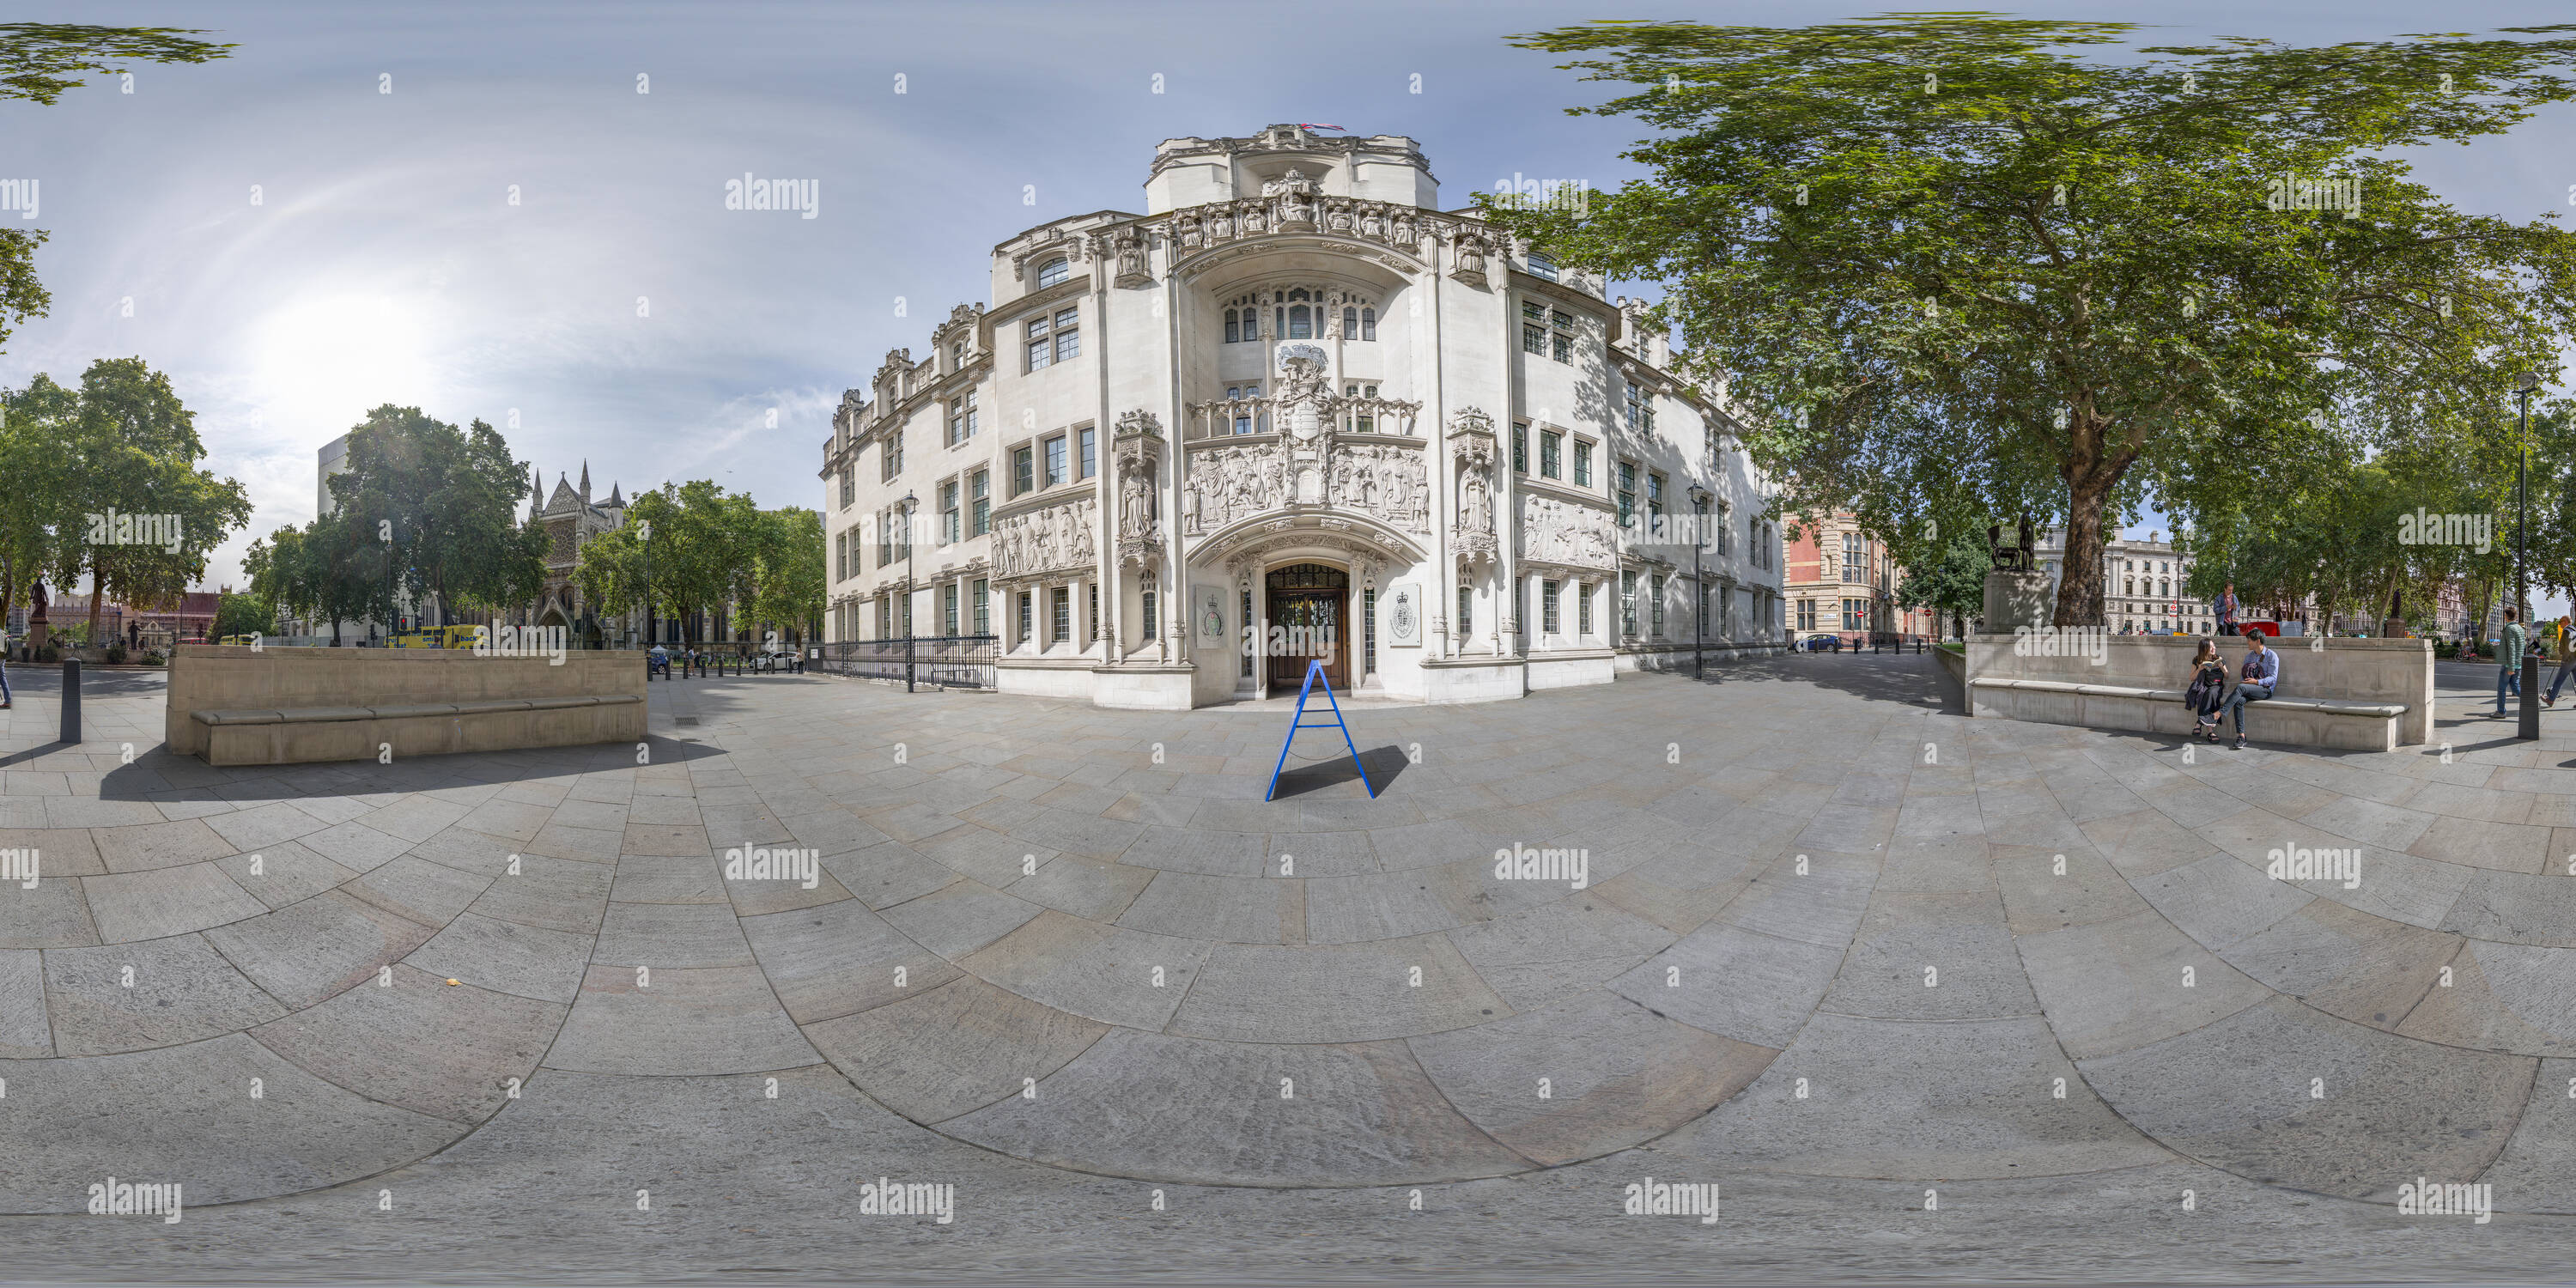 360 degree panoramic view of The Supreme Court building, Parliament Square, London.